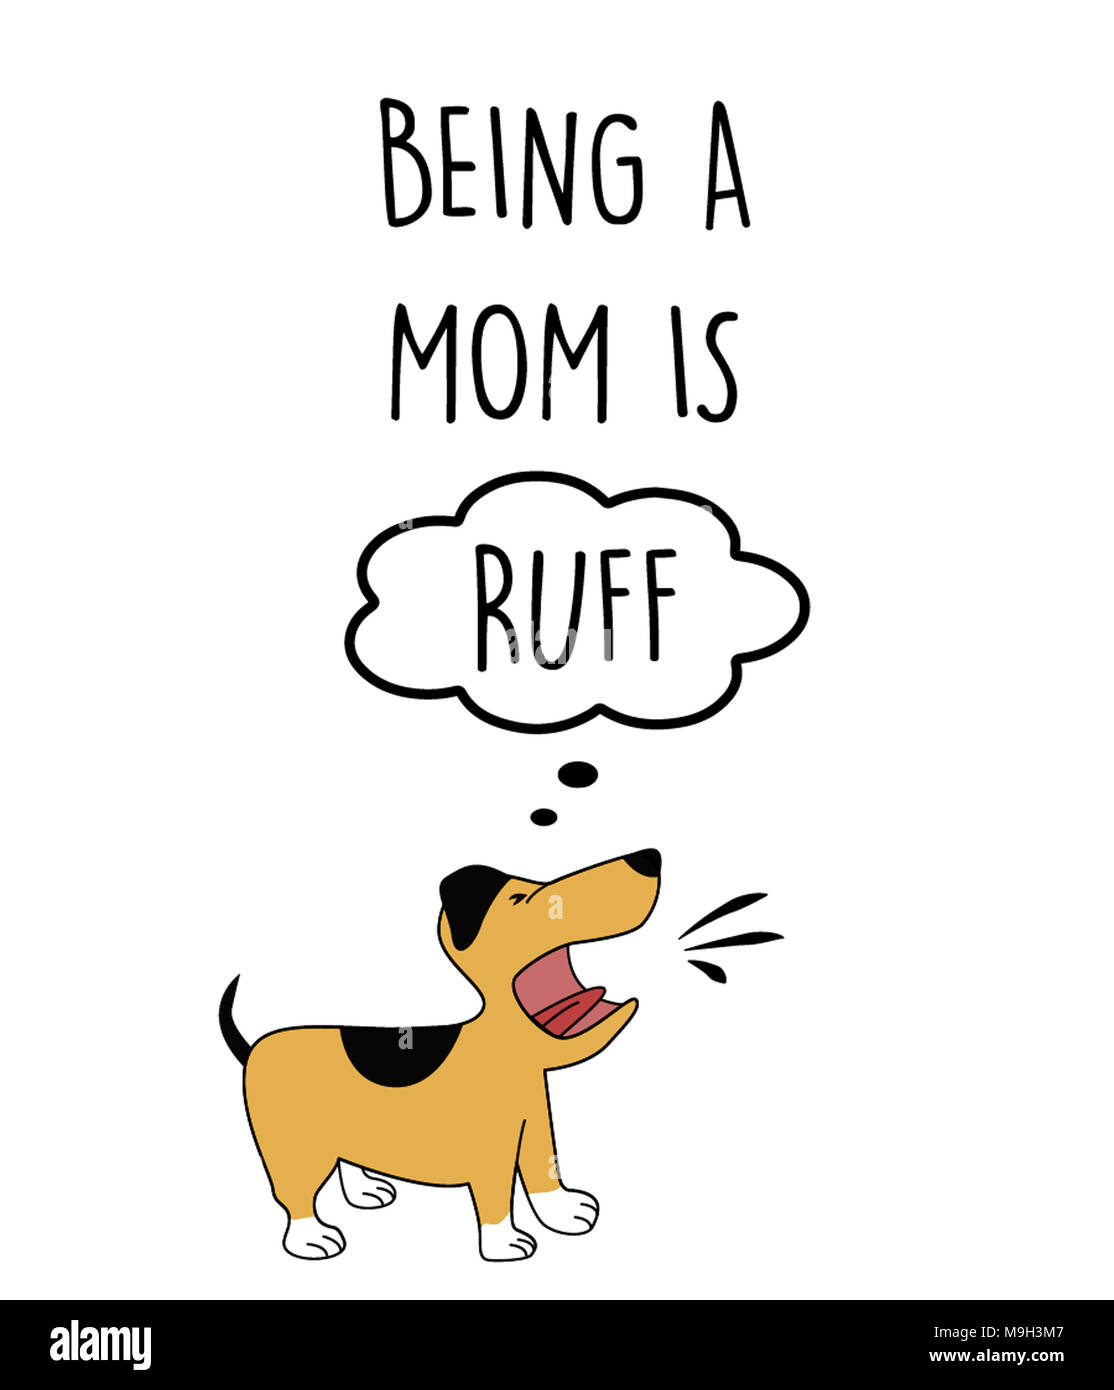 Being a mom is RUFF Stock Photo